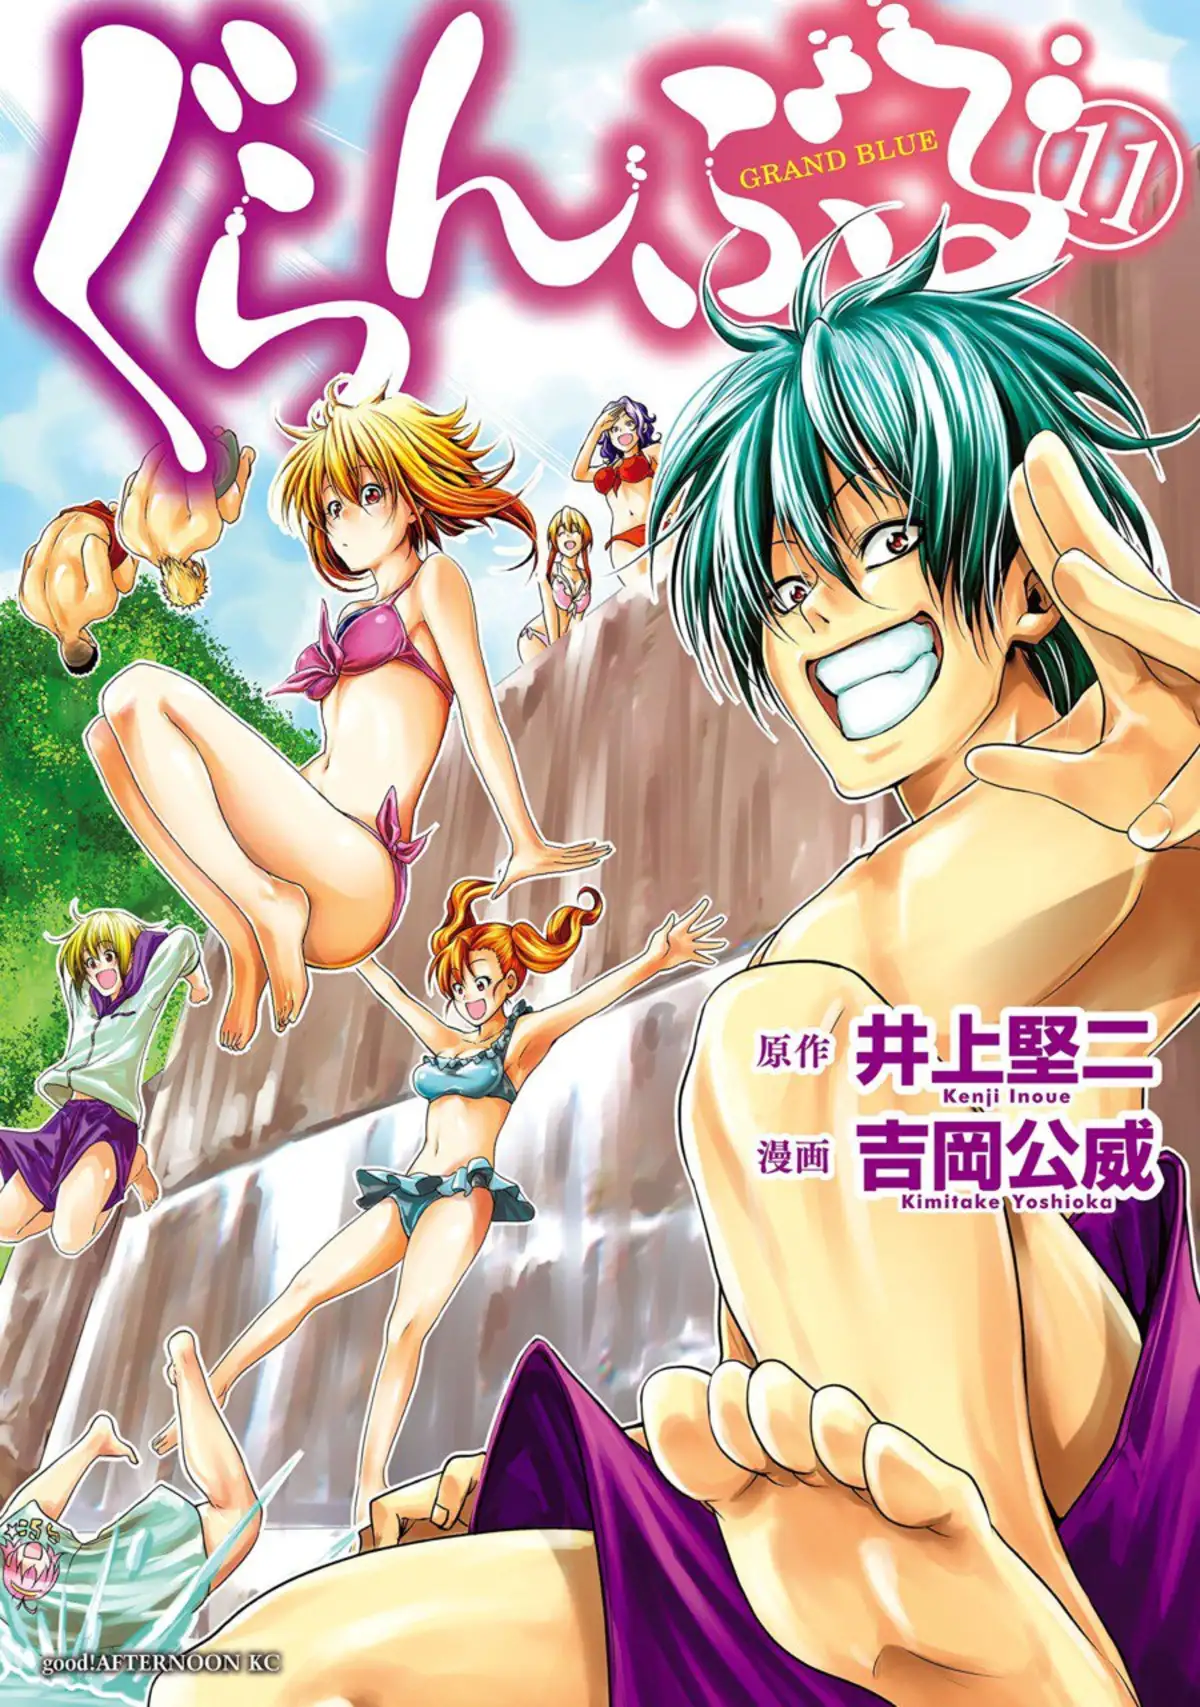 Grand Blue Volume 11 page 1